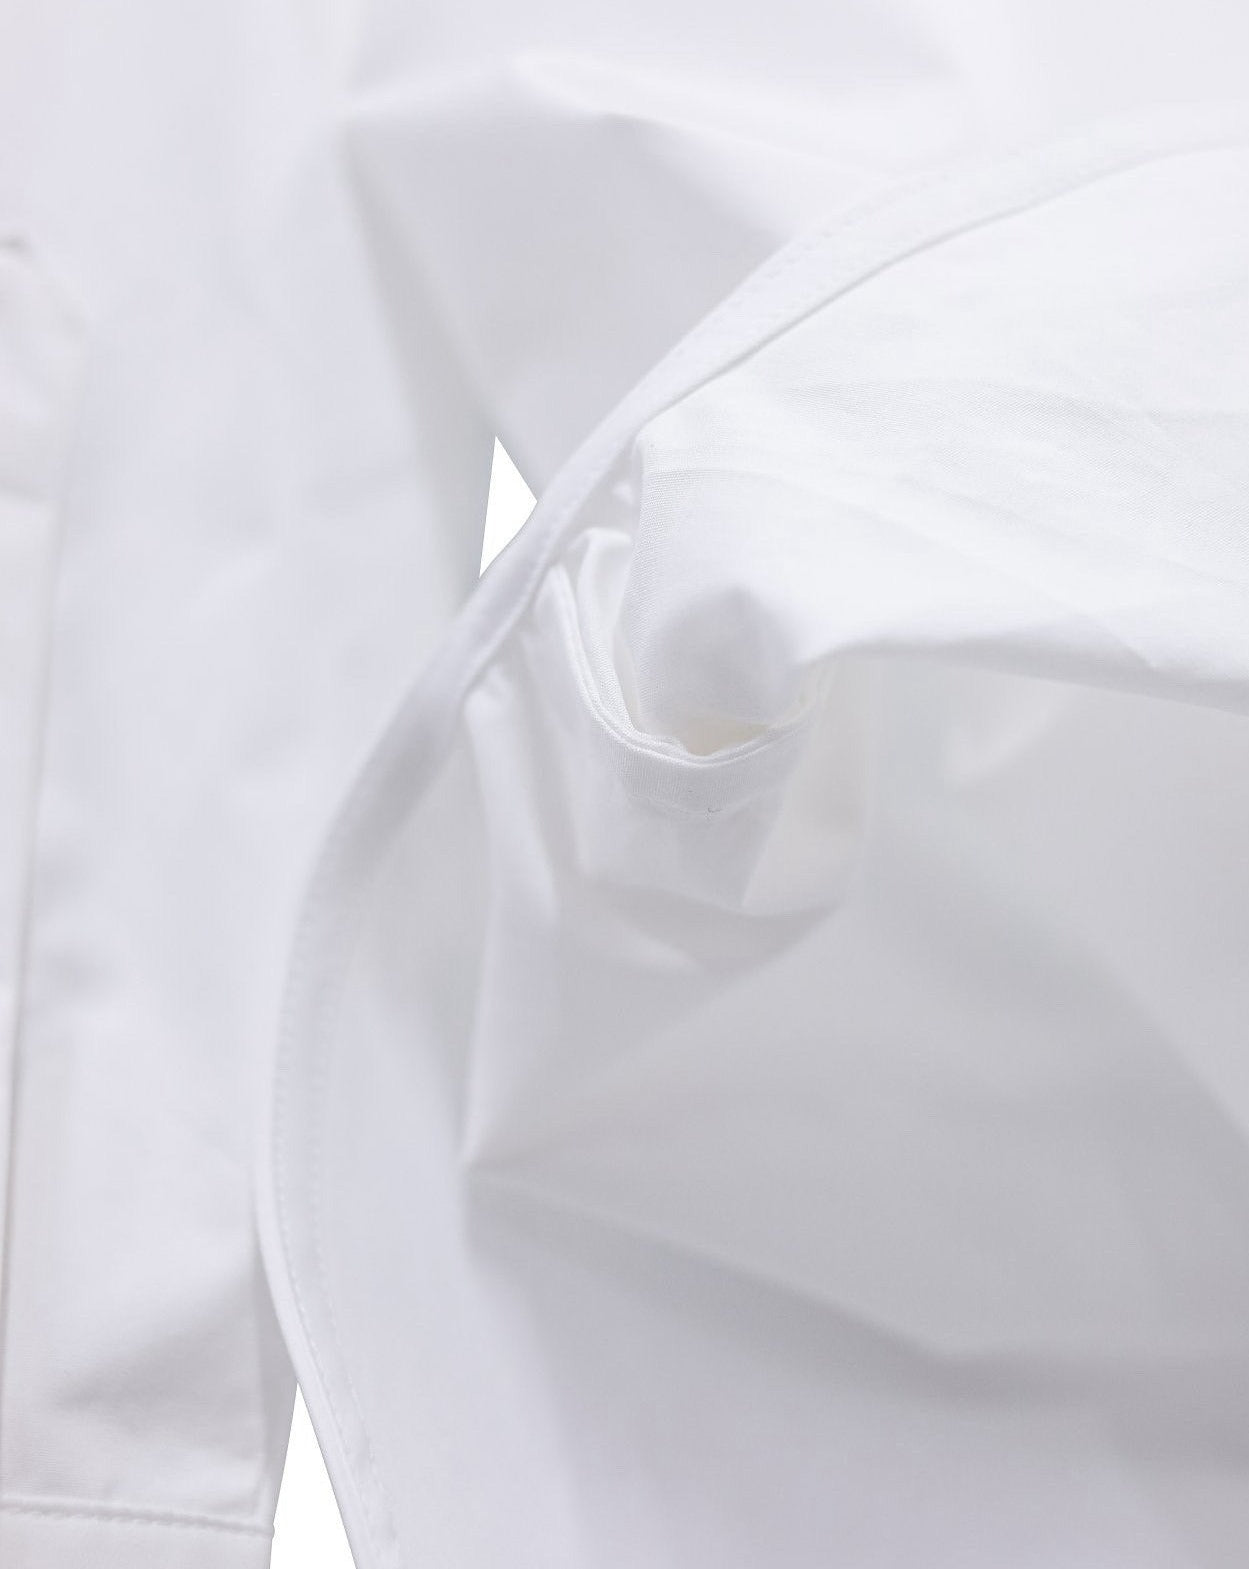 【PAPERMOON ペーパームーン】SS / Padded Shoulder Button Down Cotton Shirt